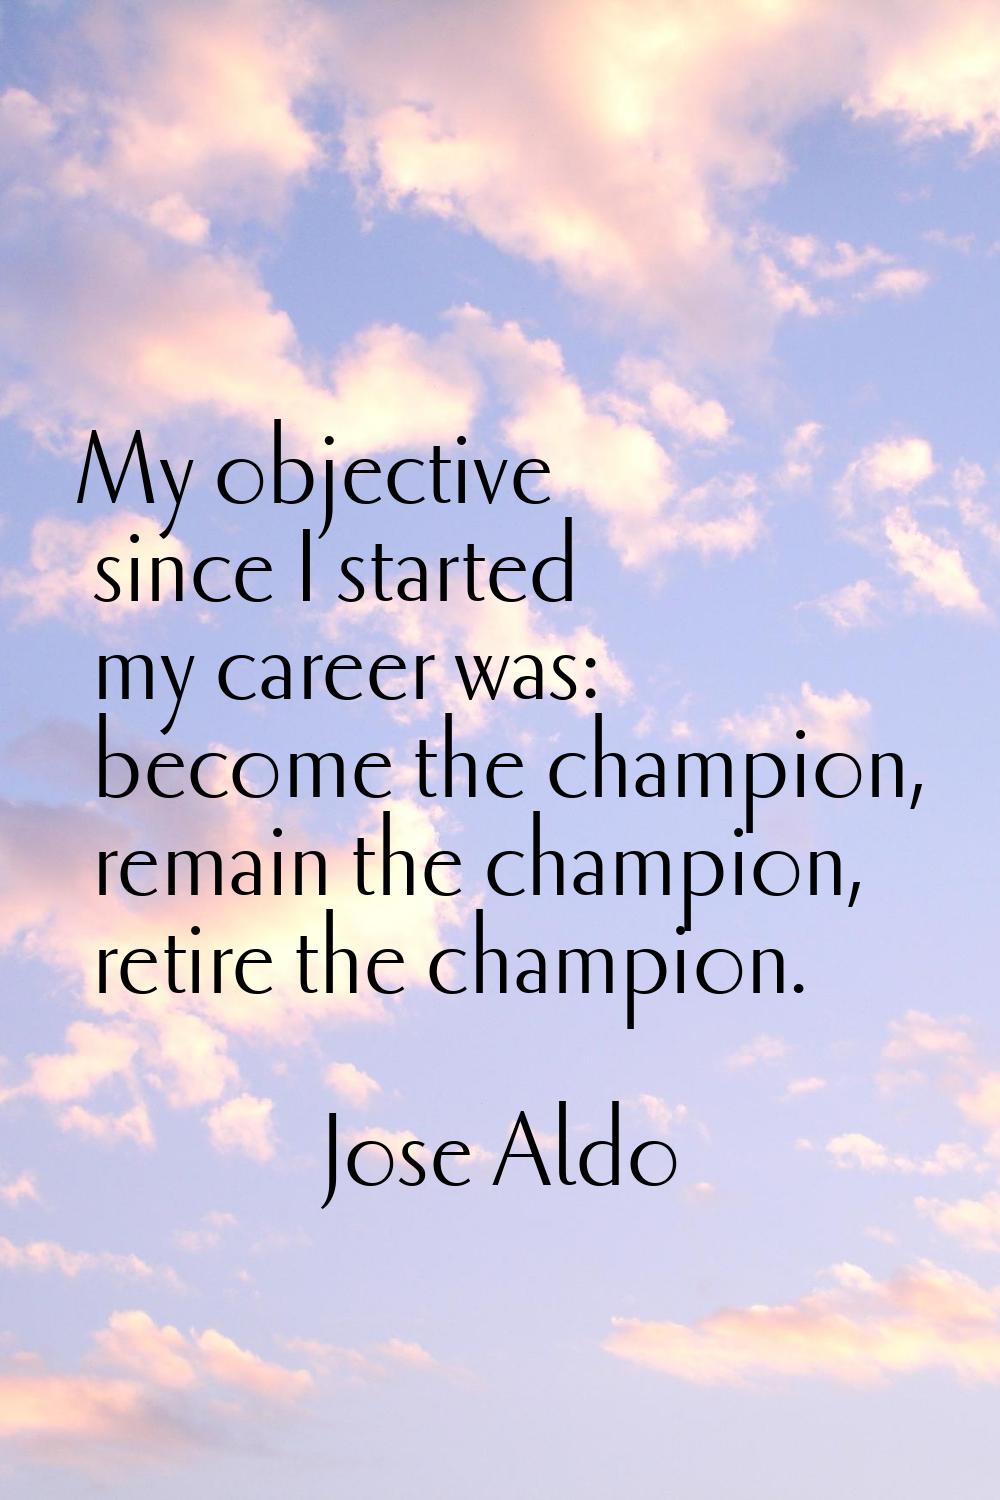 My objective since I started my career was: become the champion, remain the champion, retire the ch